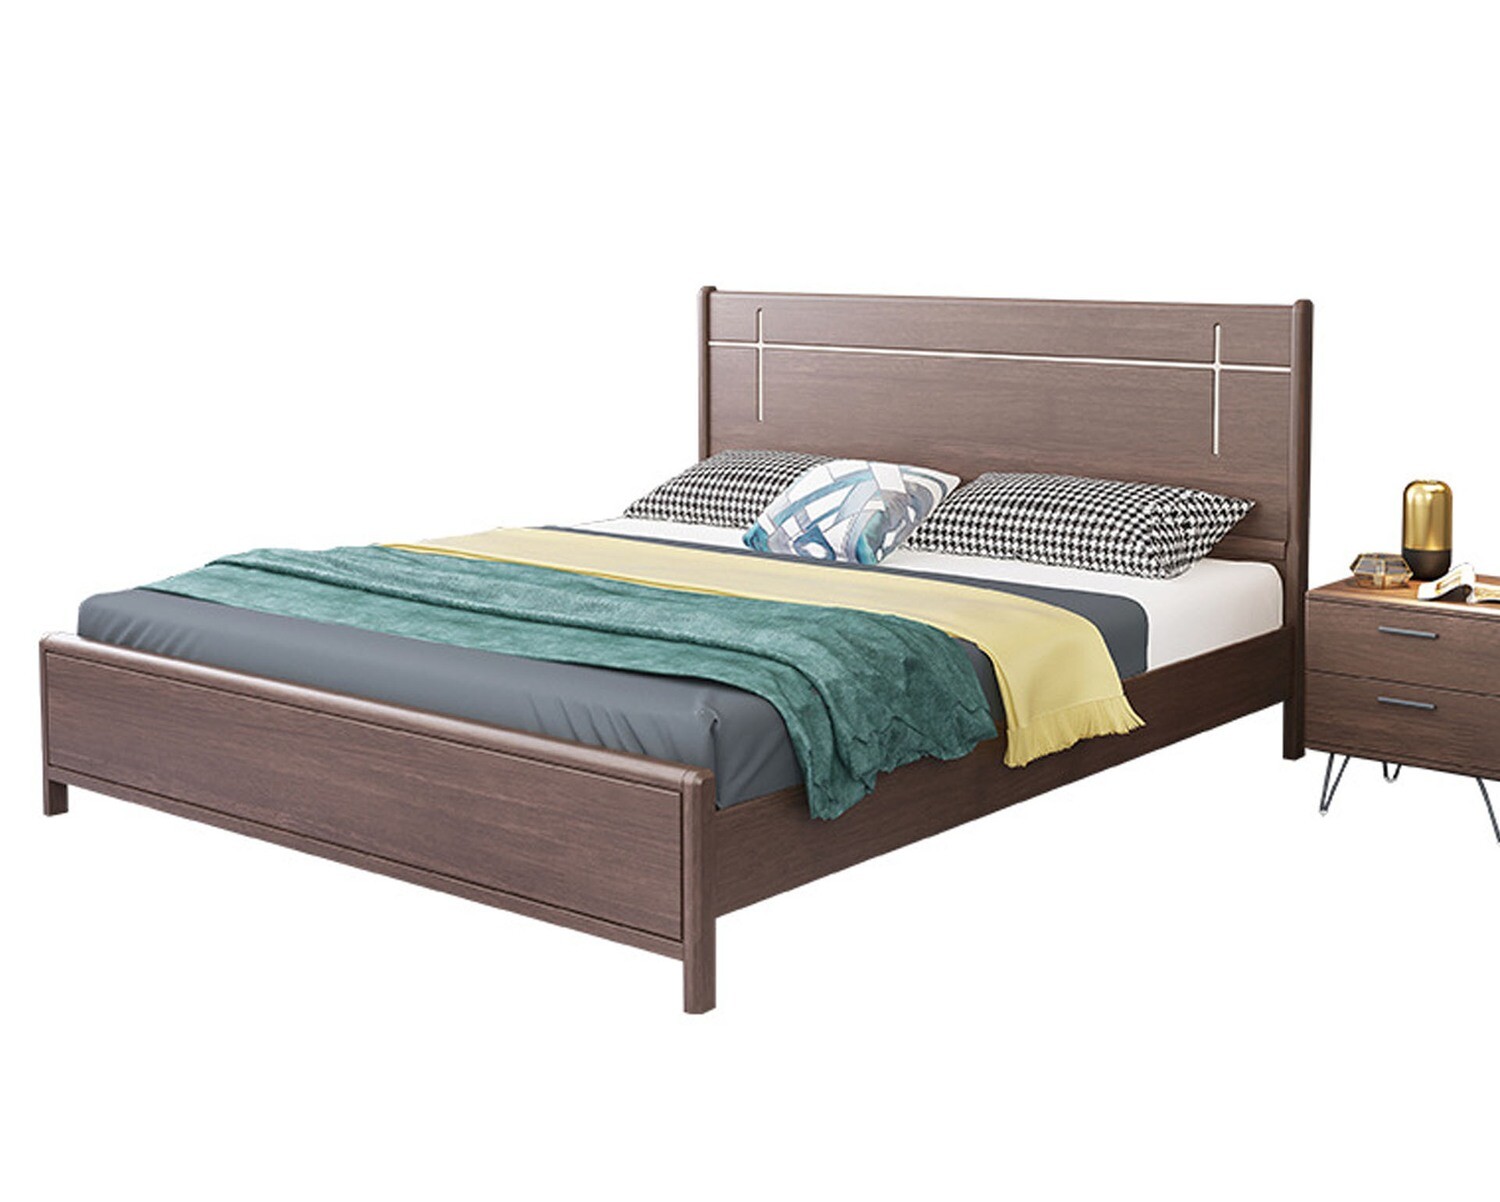 Flotti Tavros Solid Thailand Rubberwood Bed Frame
 (Queen, King) (Side Drawers Are Not Included)